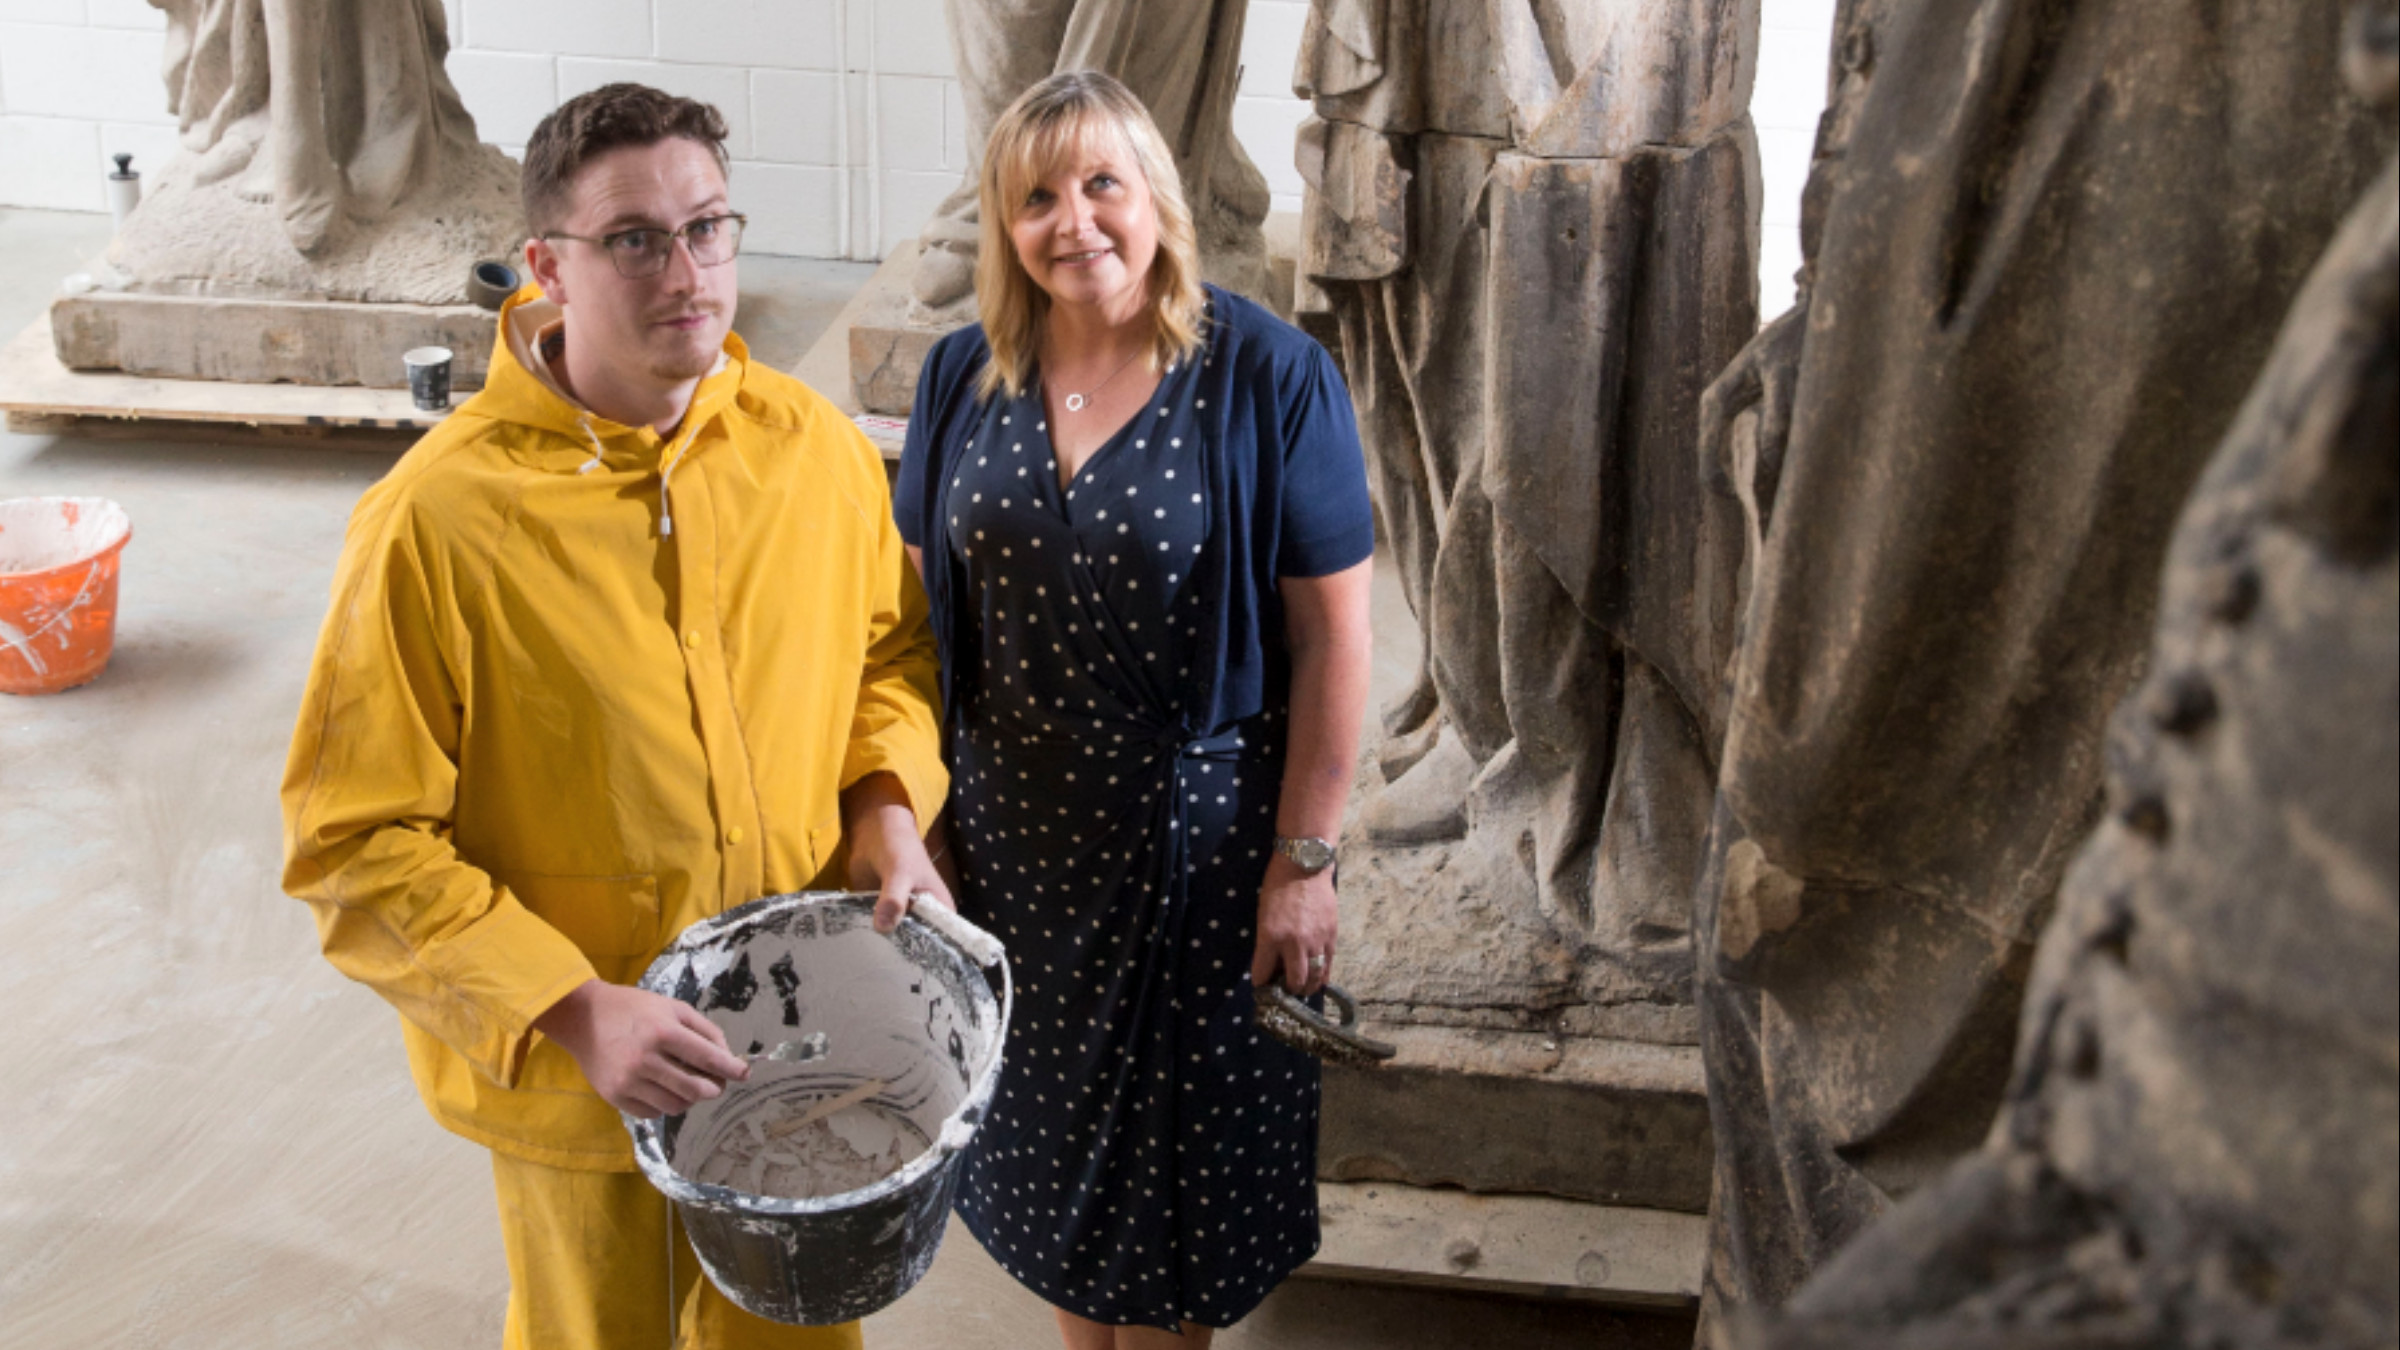 Sculptor David Mitchell wearing yellow overalls in Grovewood Business Centre studio with Jackie Taylor UKSE